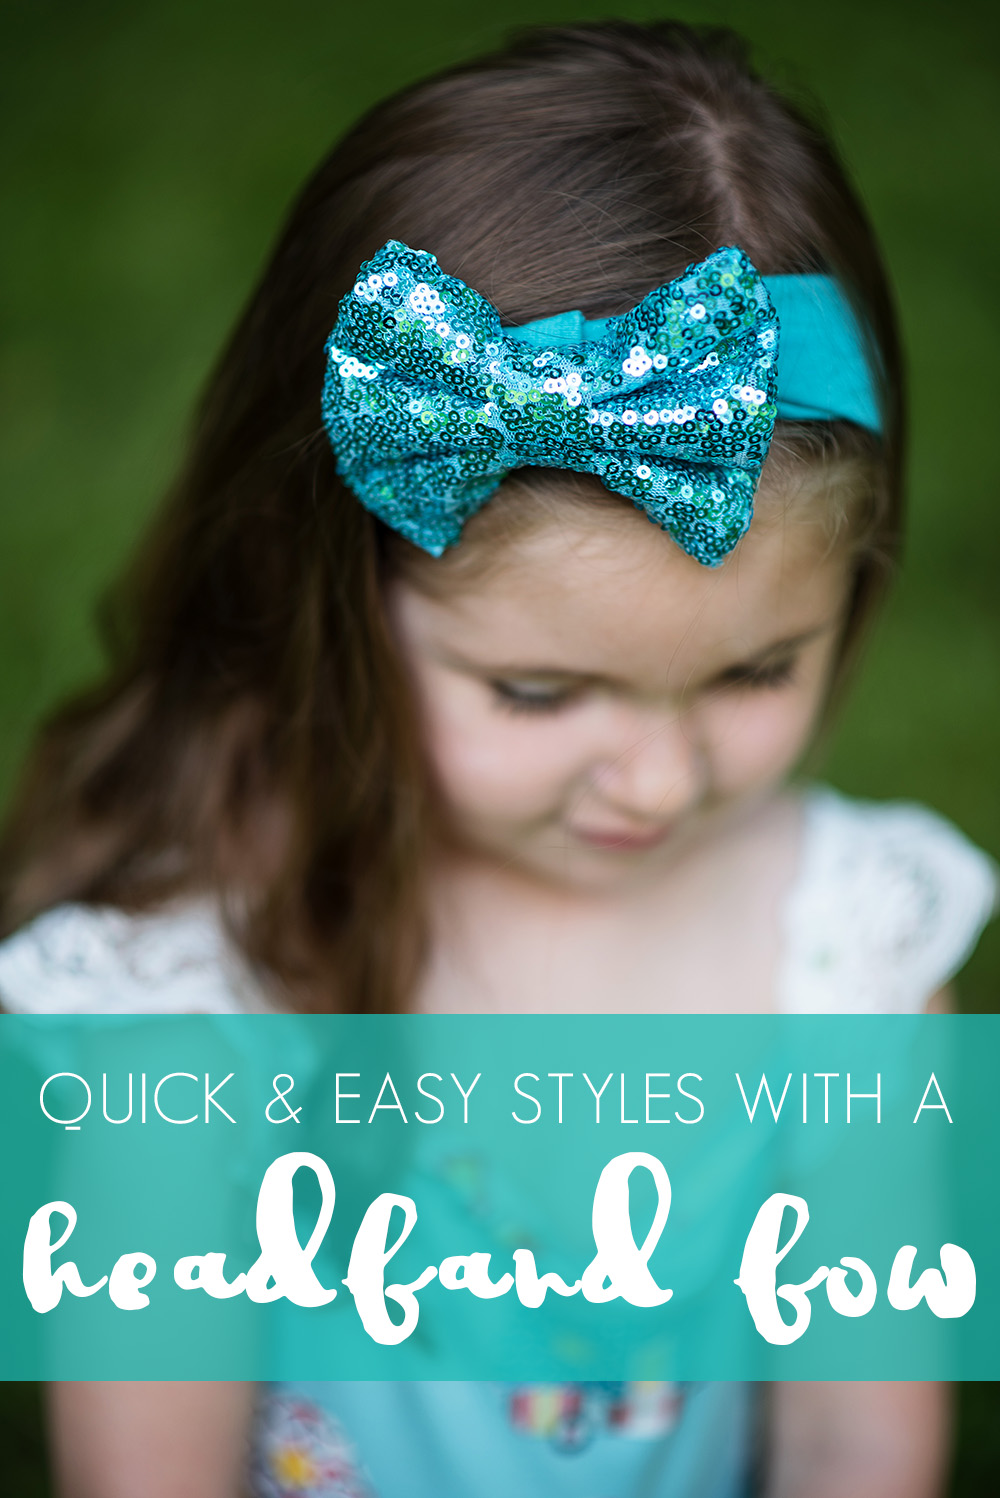 Simple Ways to Use Hair Bows in Your Little Girl's Hair - The Hair Bow  Company - Boutique Clothes & Bows